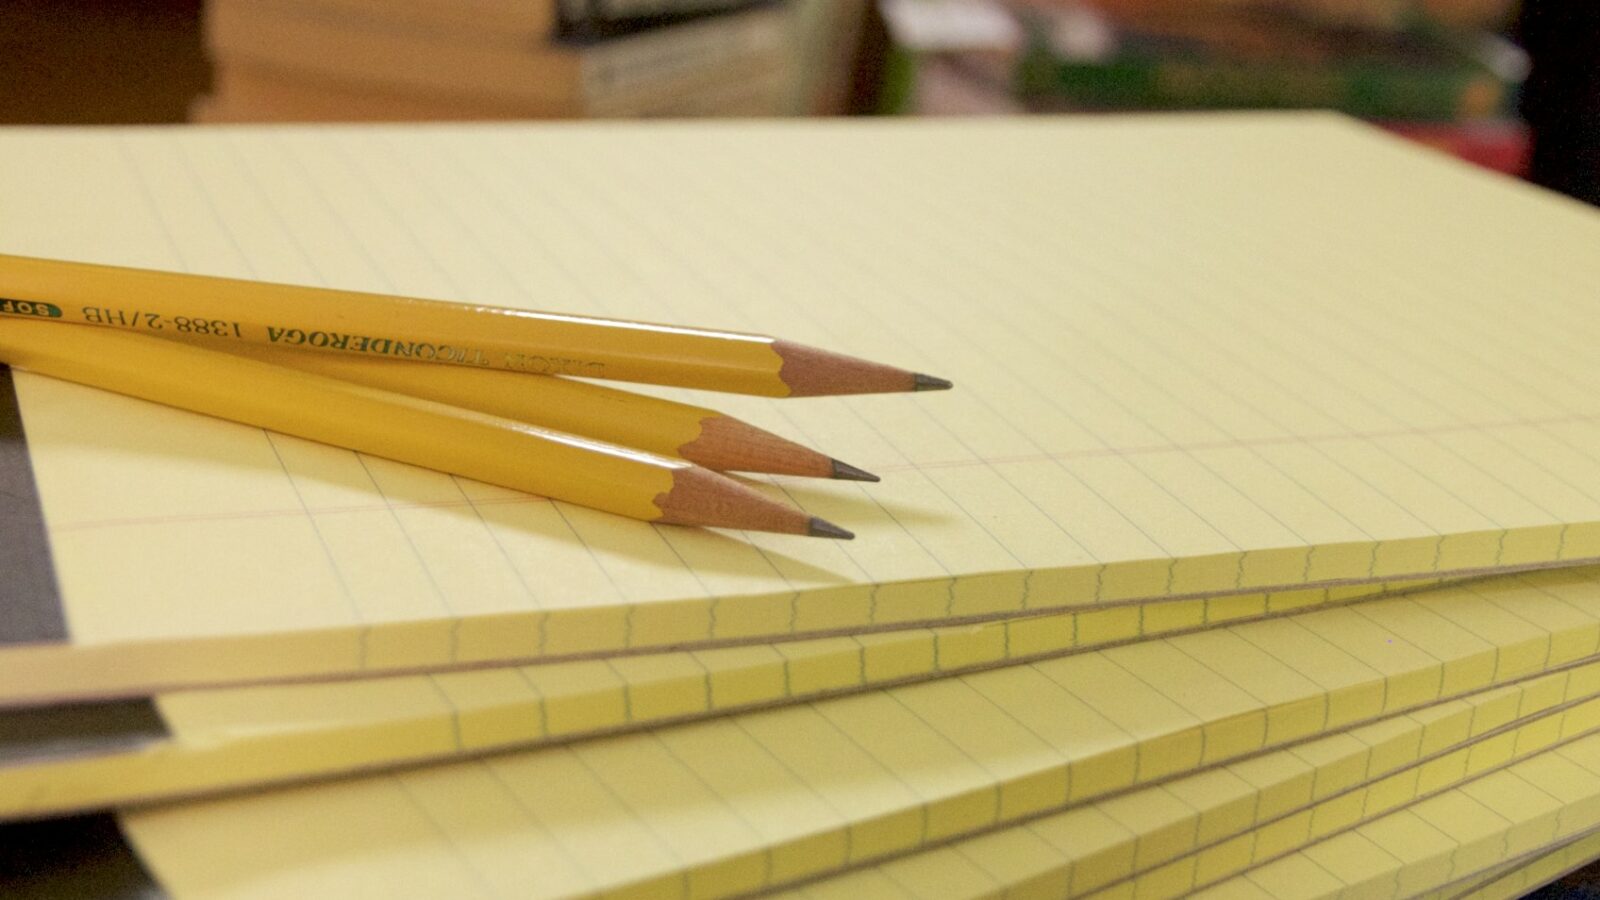 A stack of notepads with pencils